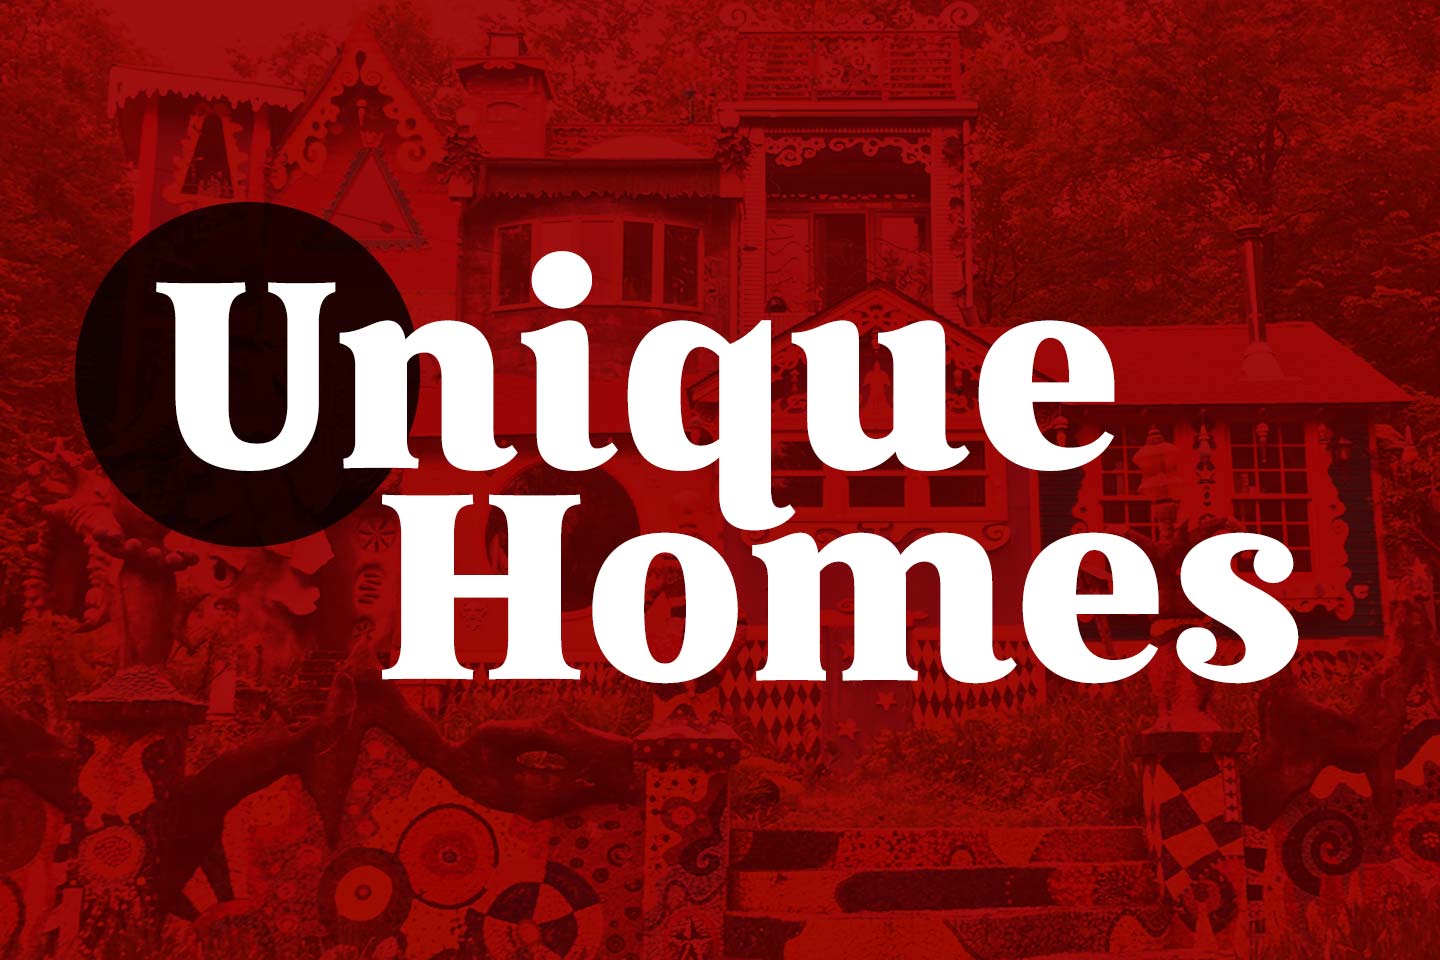 Graphic of house with 'Unique Homes' text over image